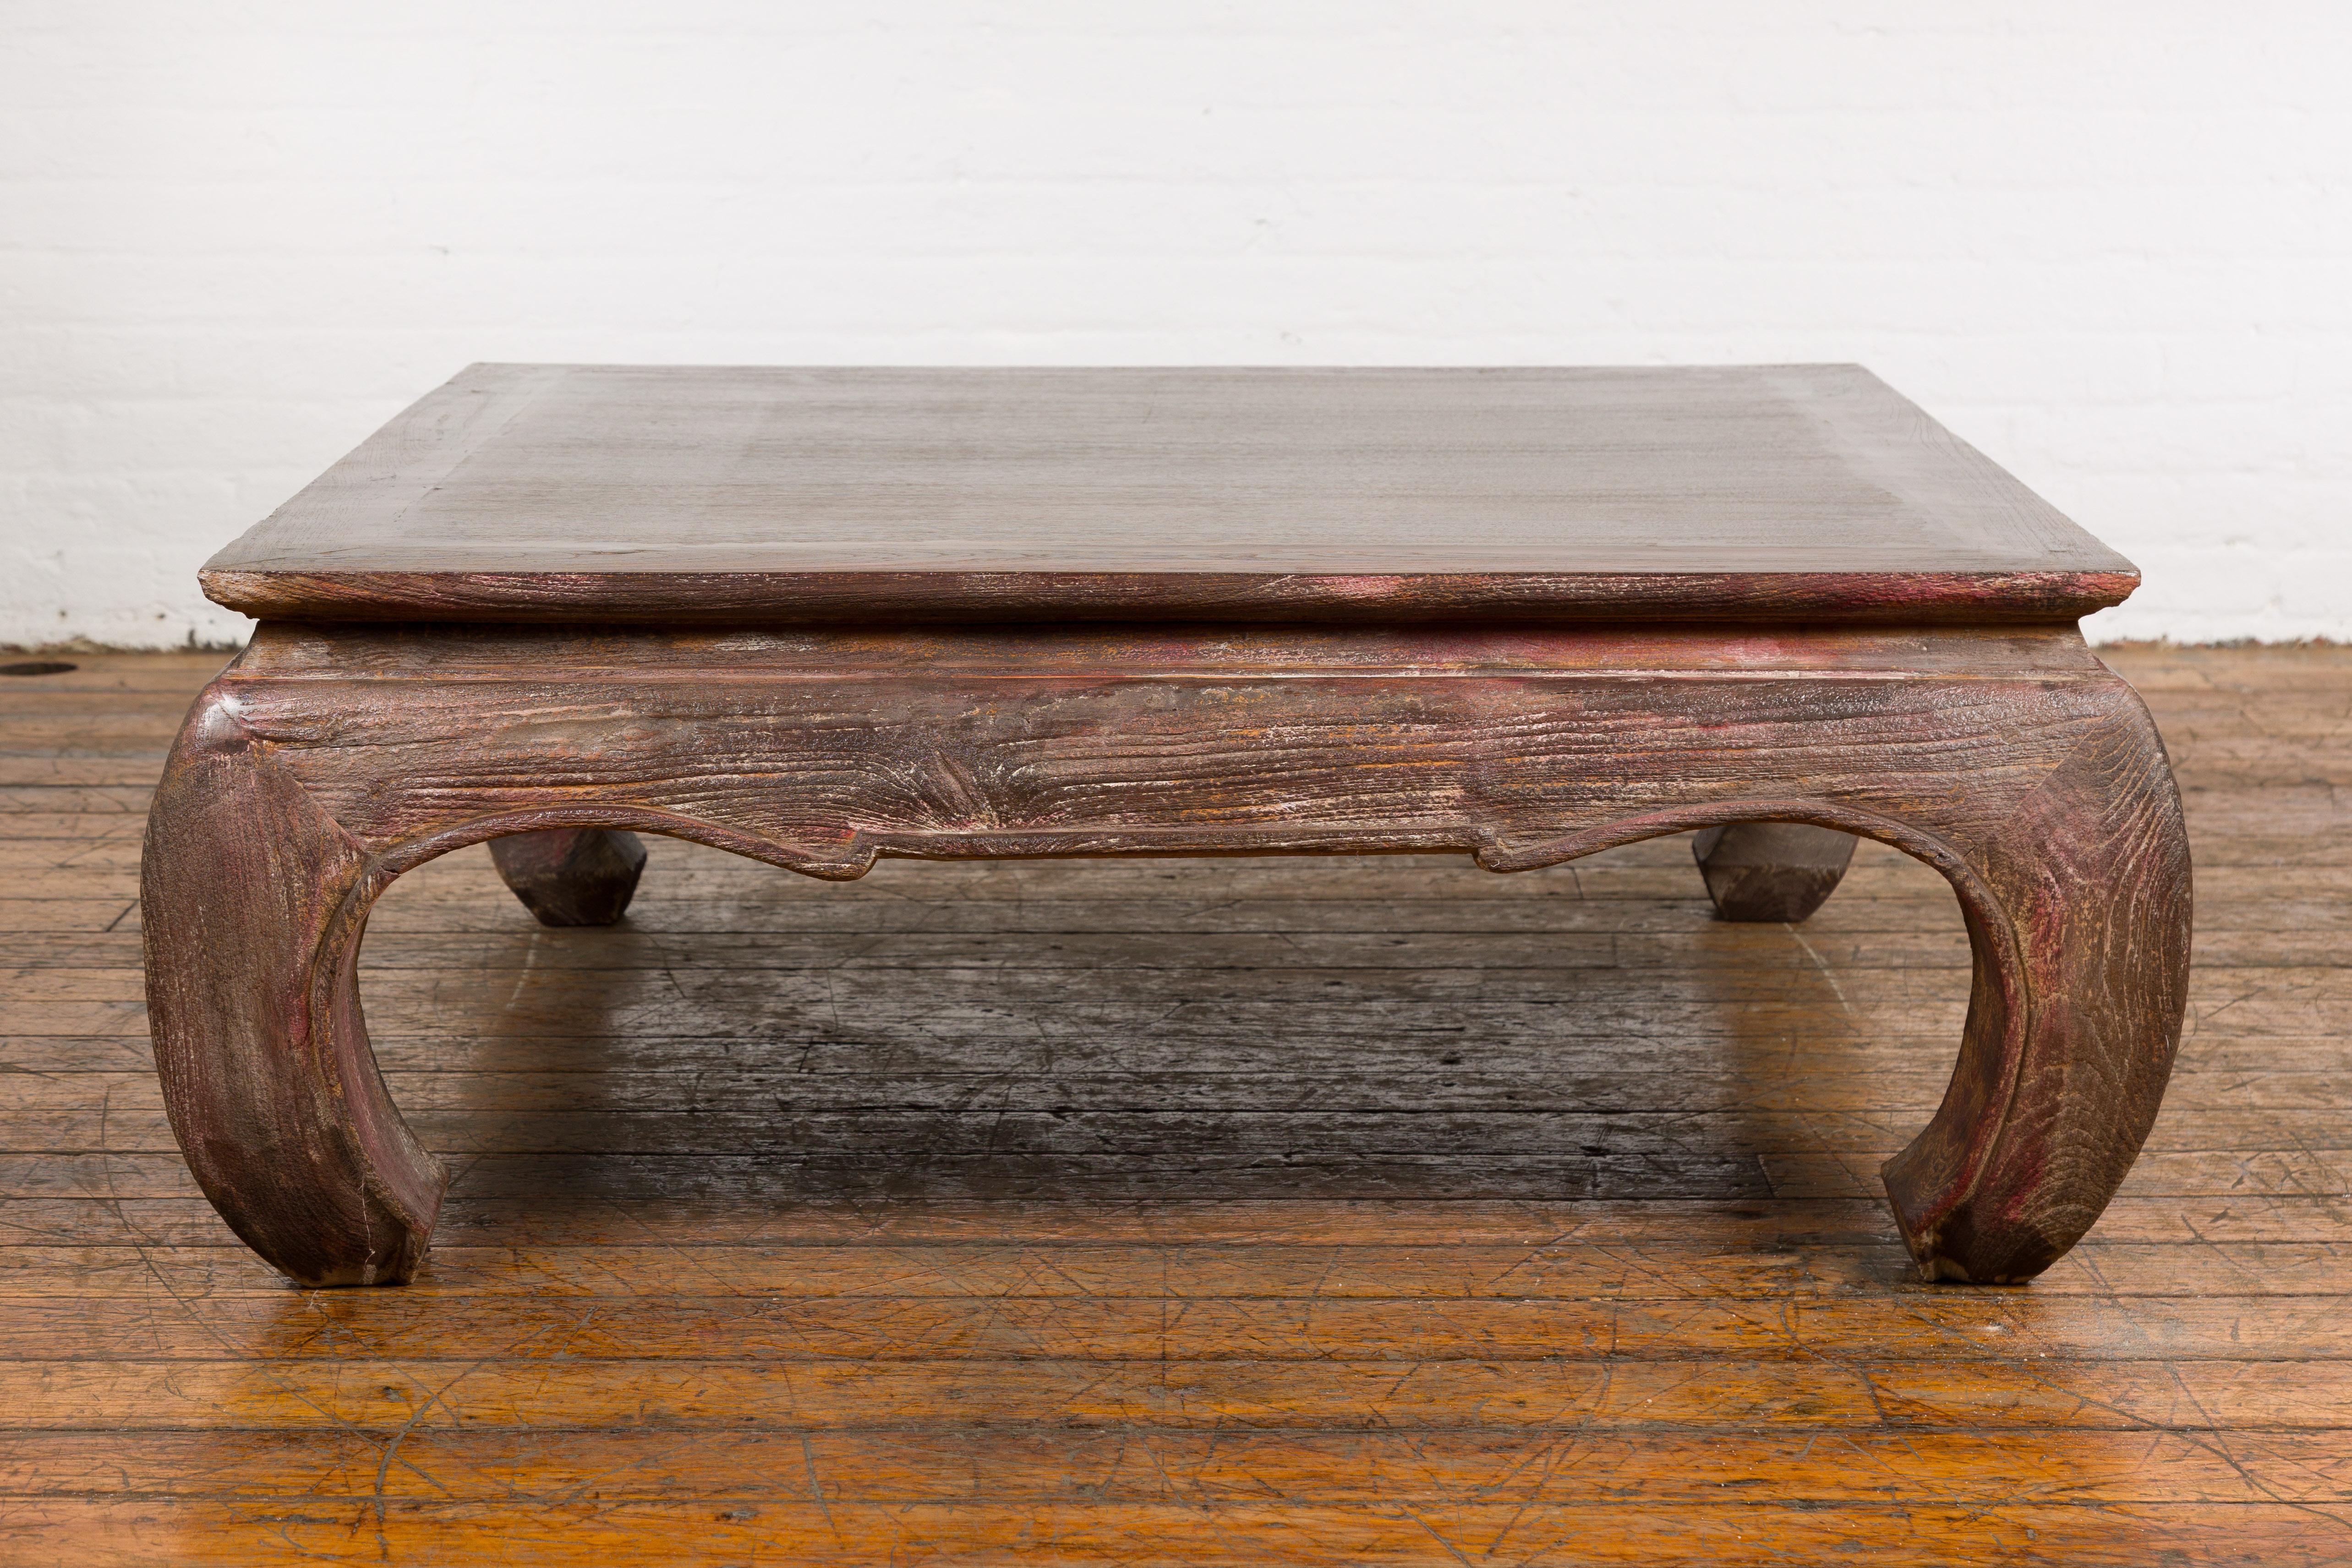 Vintage Coffee Table with Chow Legs, Carved Apron and Distressed Patina In Good Condition For Sale In Yonkers, NY